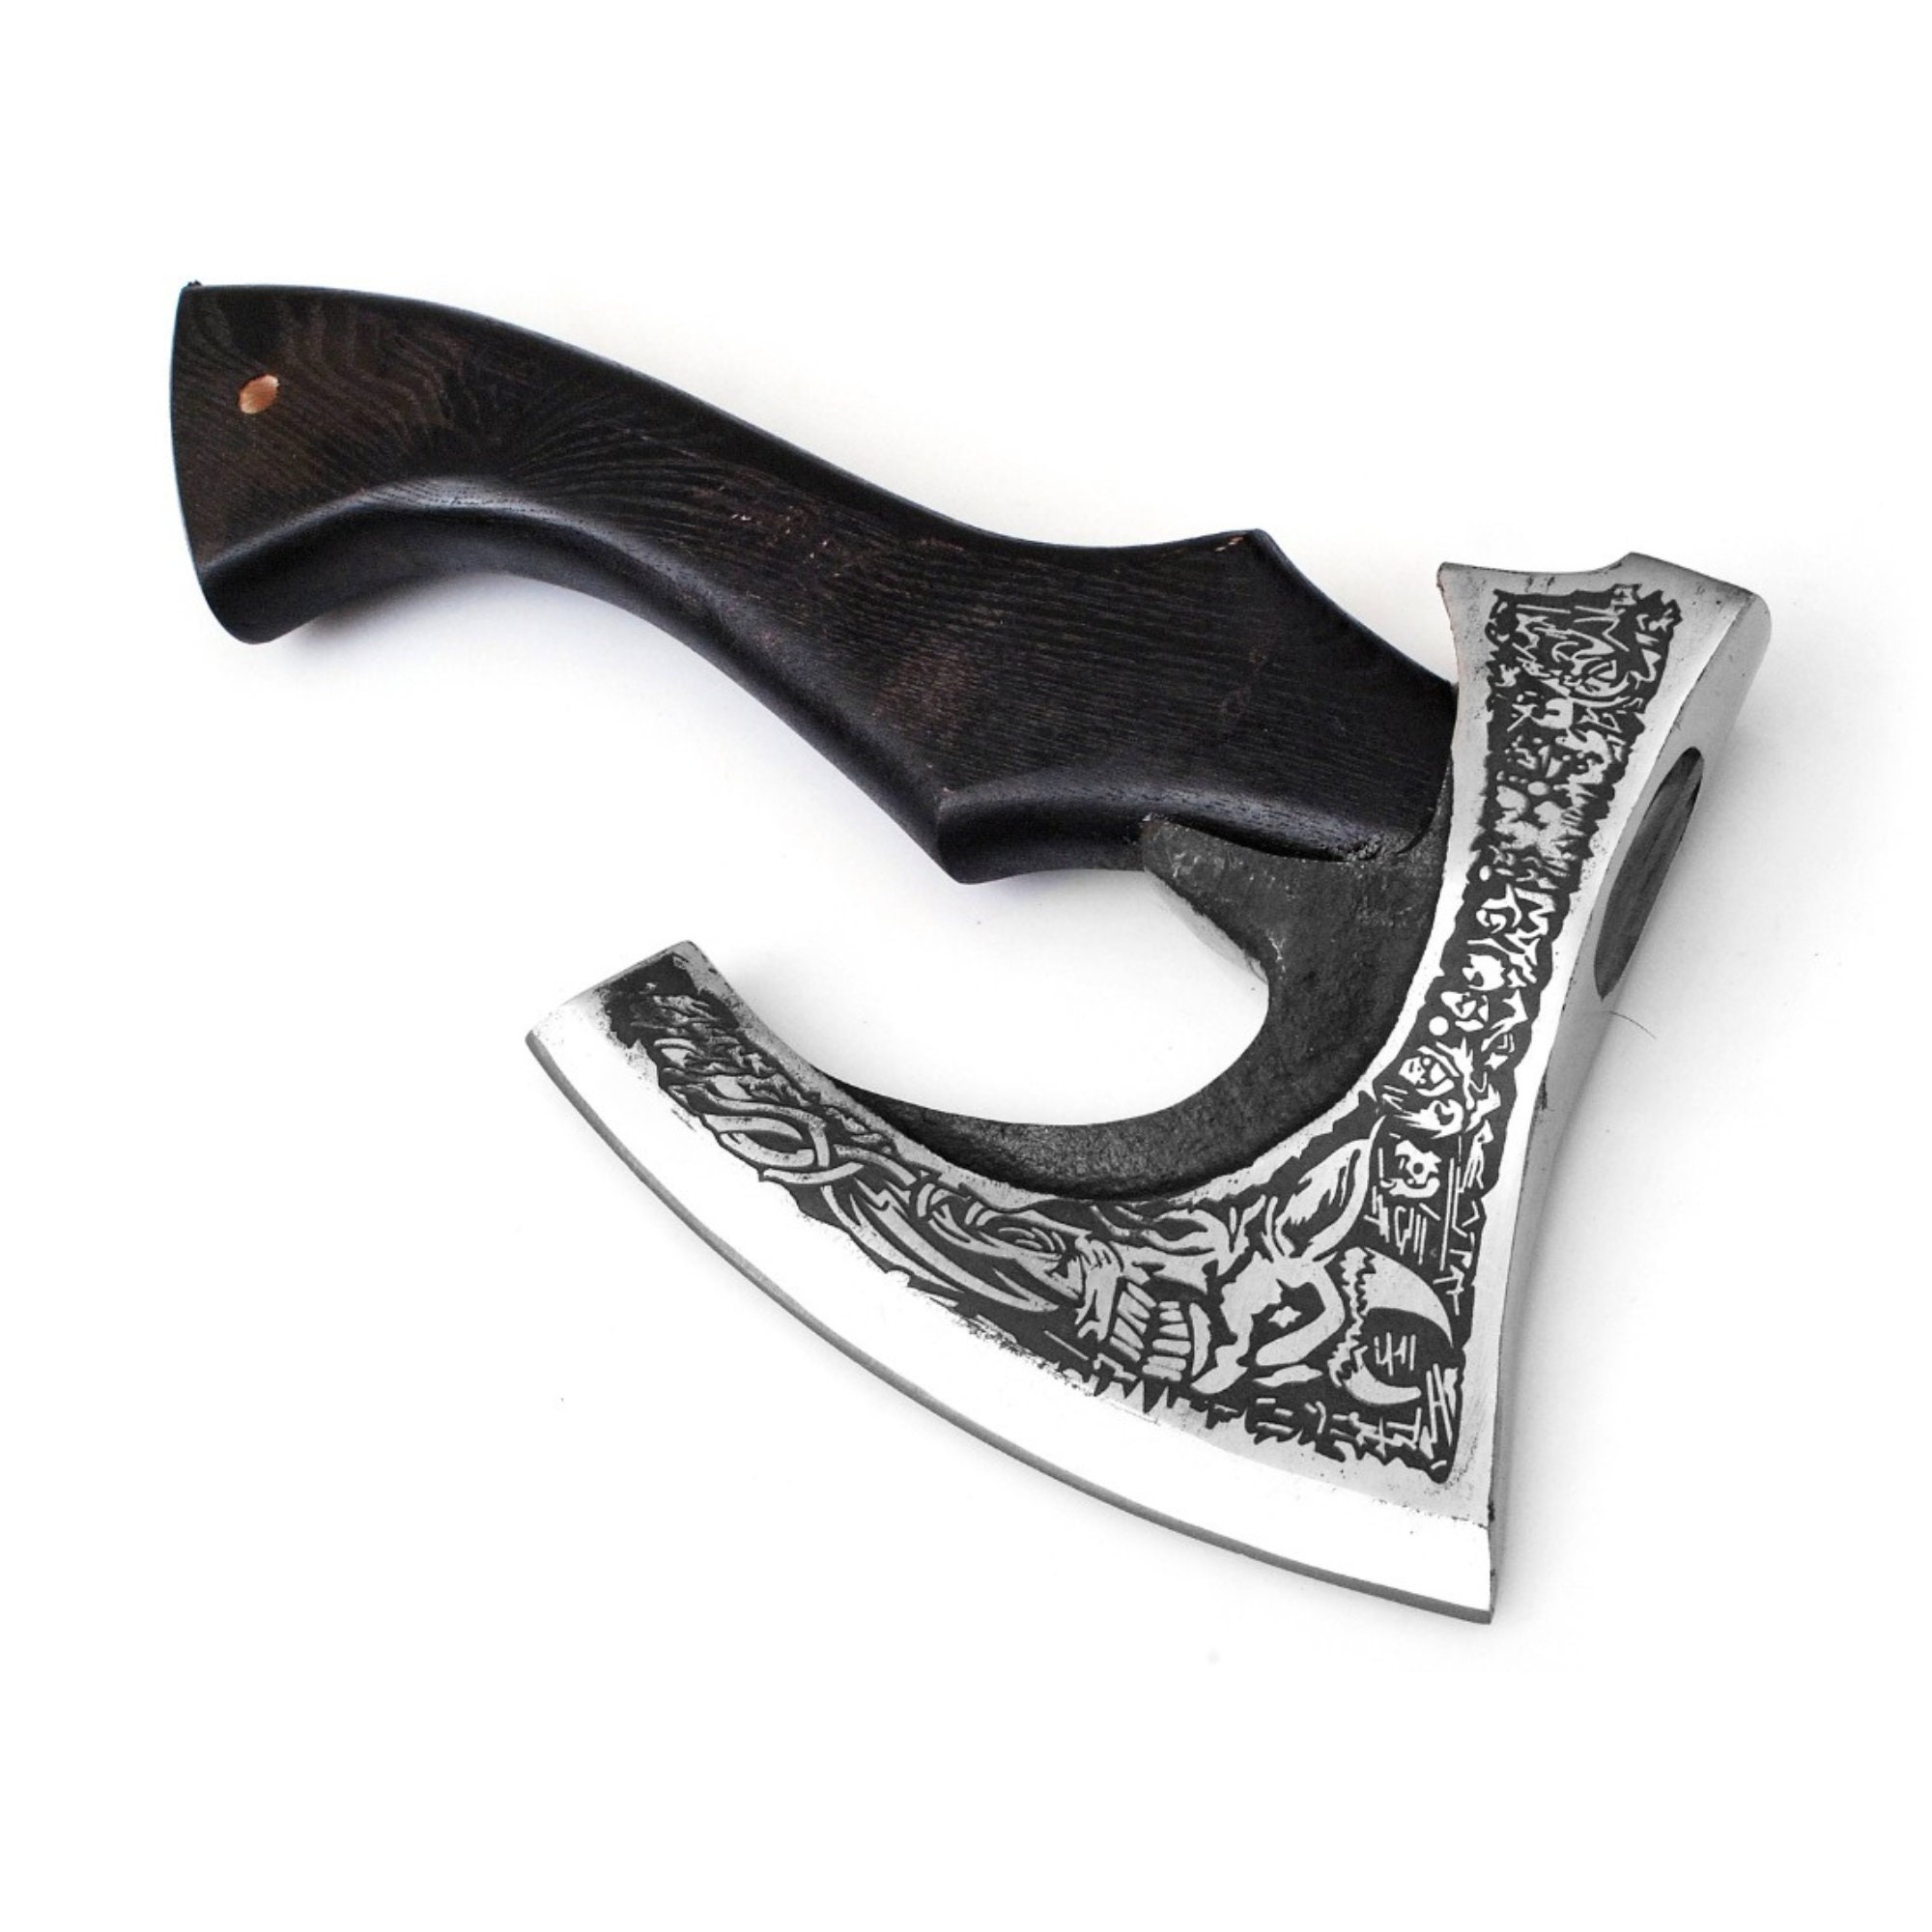 Blacksmith Hand Forge Small Carving Axe Carpenter Tool With